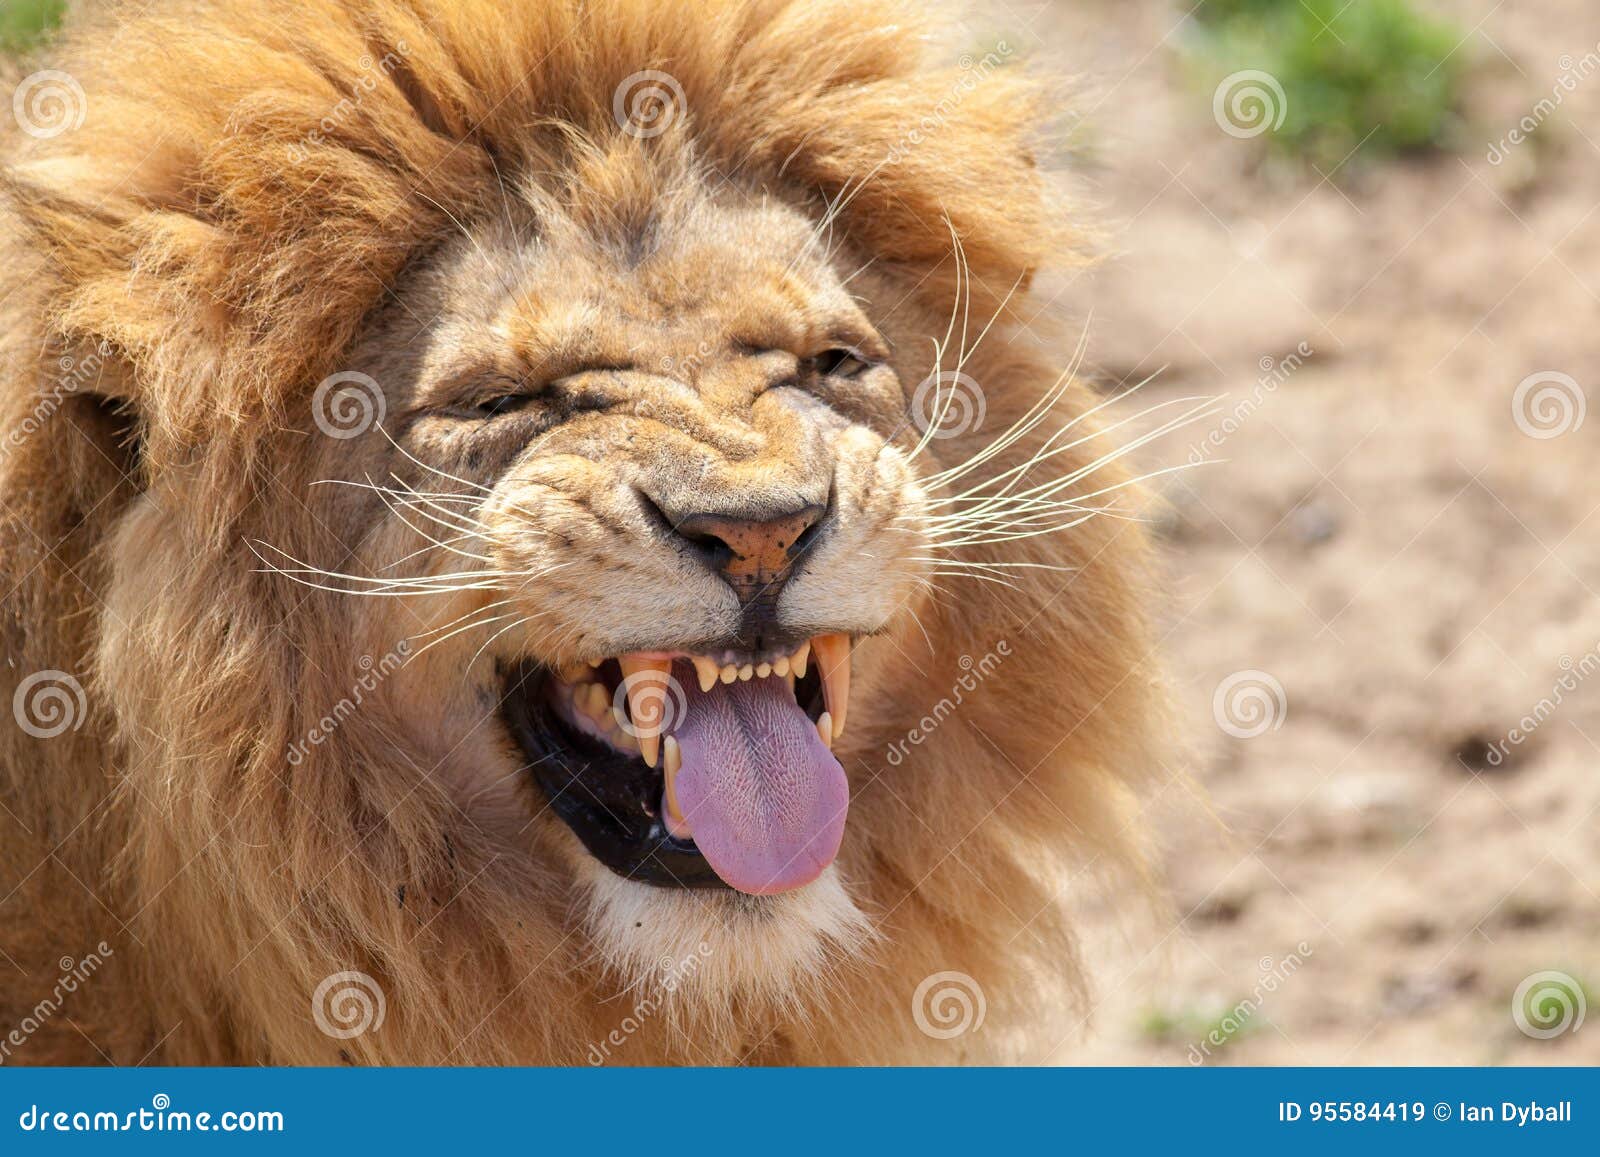 lion pulling a funnny face. animal tongue and canine teeth.